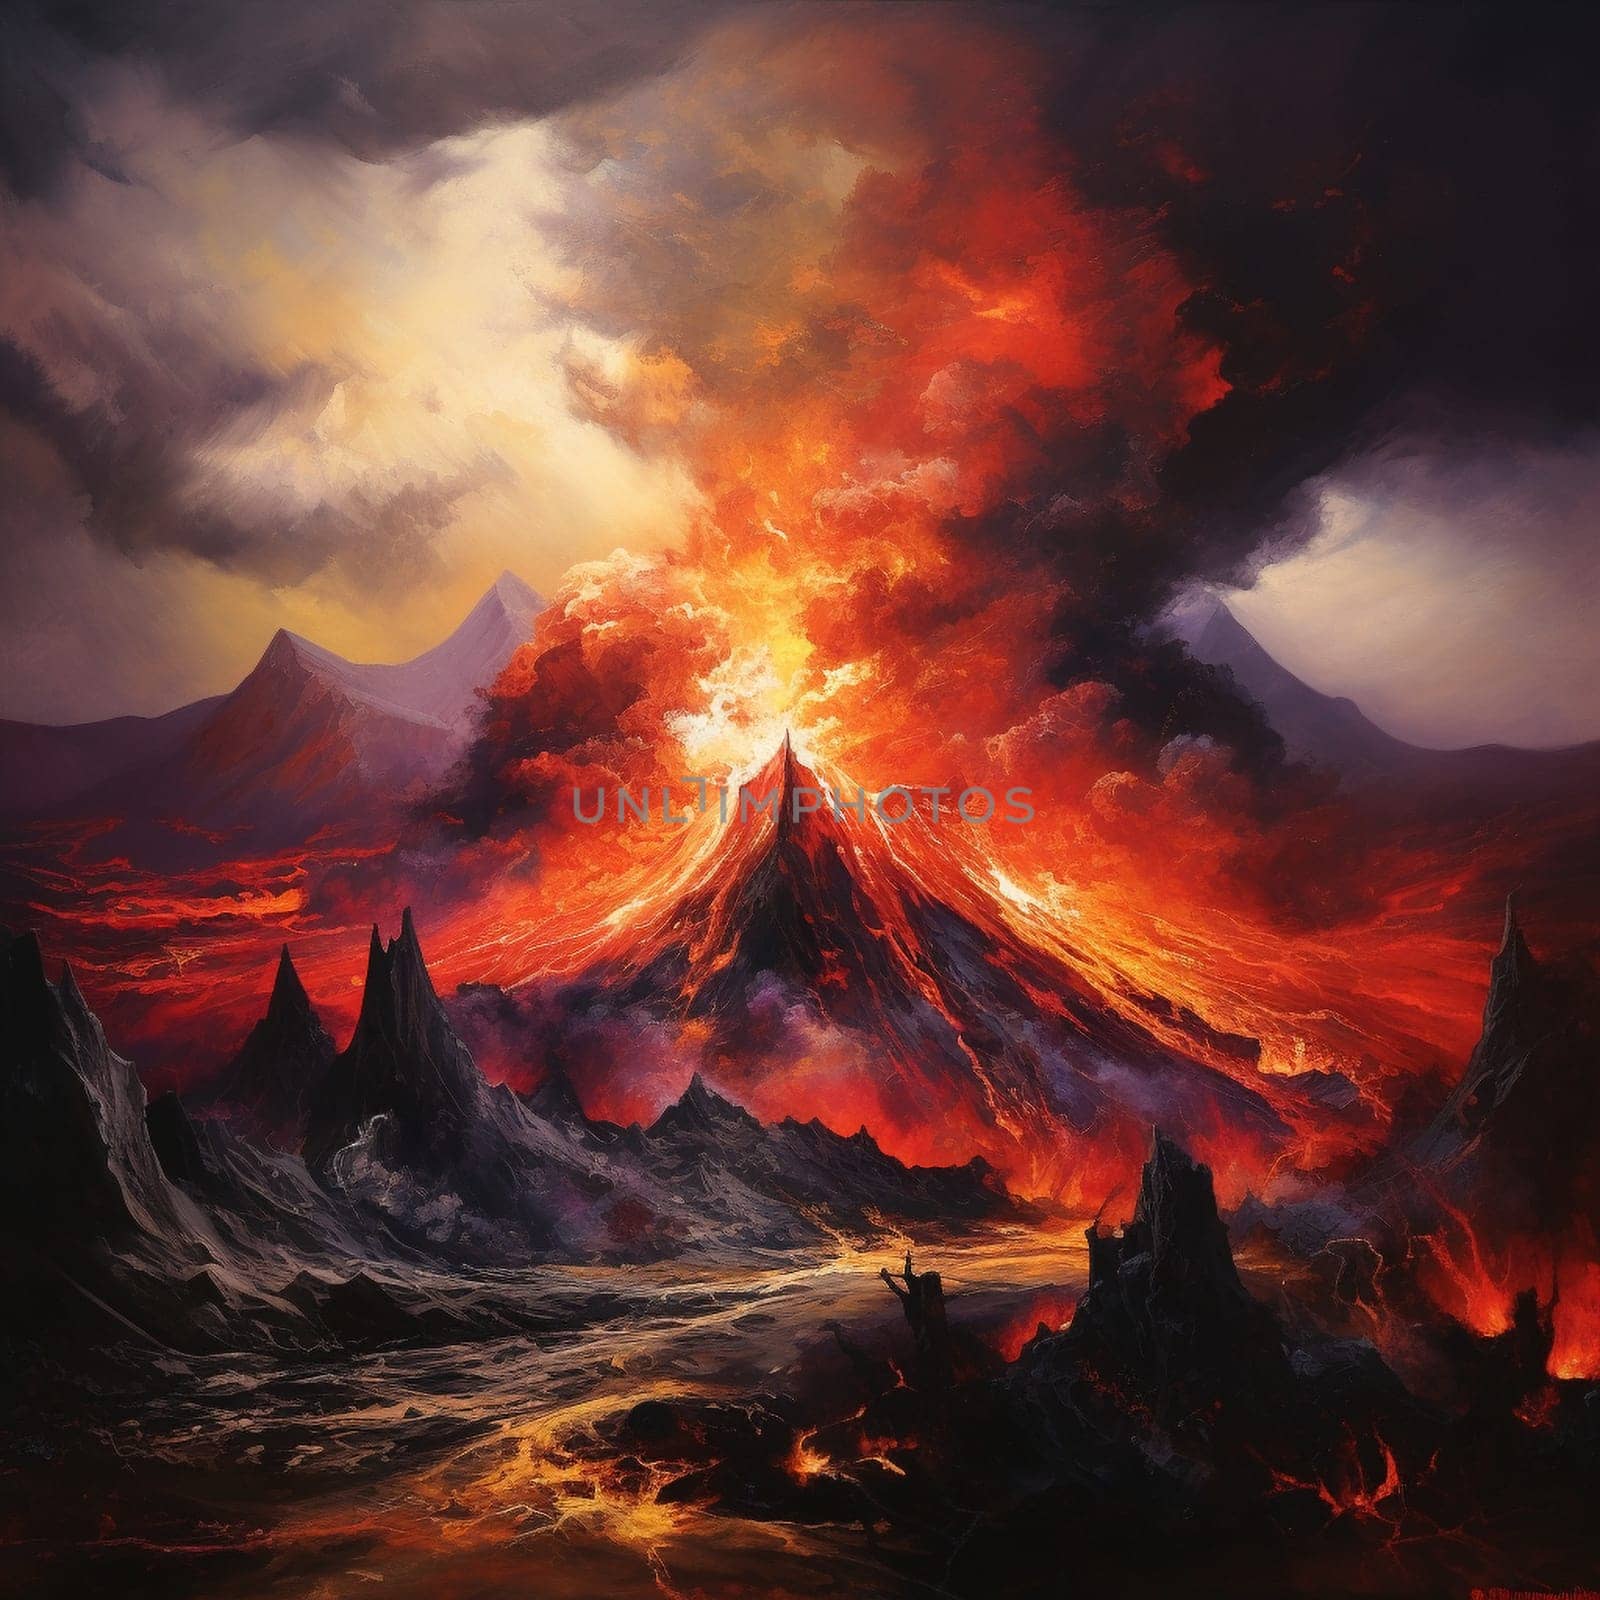 Vibrant and Dramatic Artistic Depiction of a Volcanic Eruption by Sahin